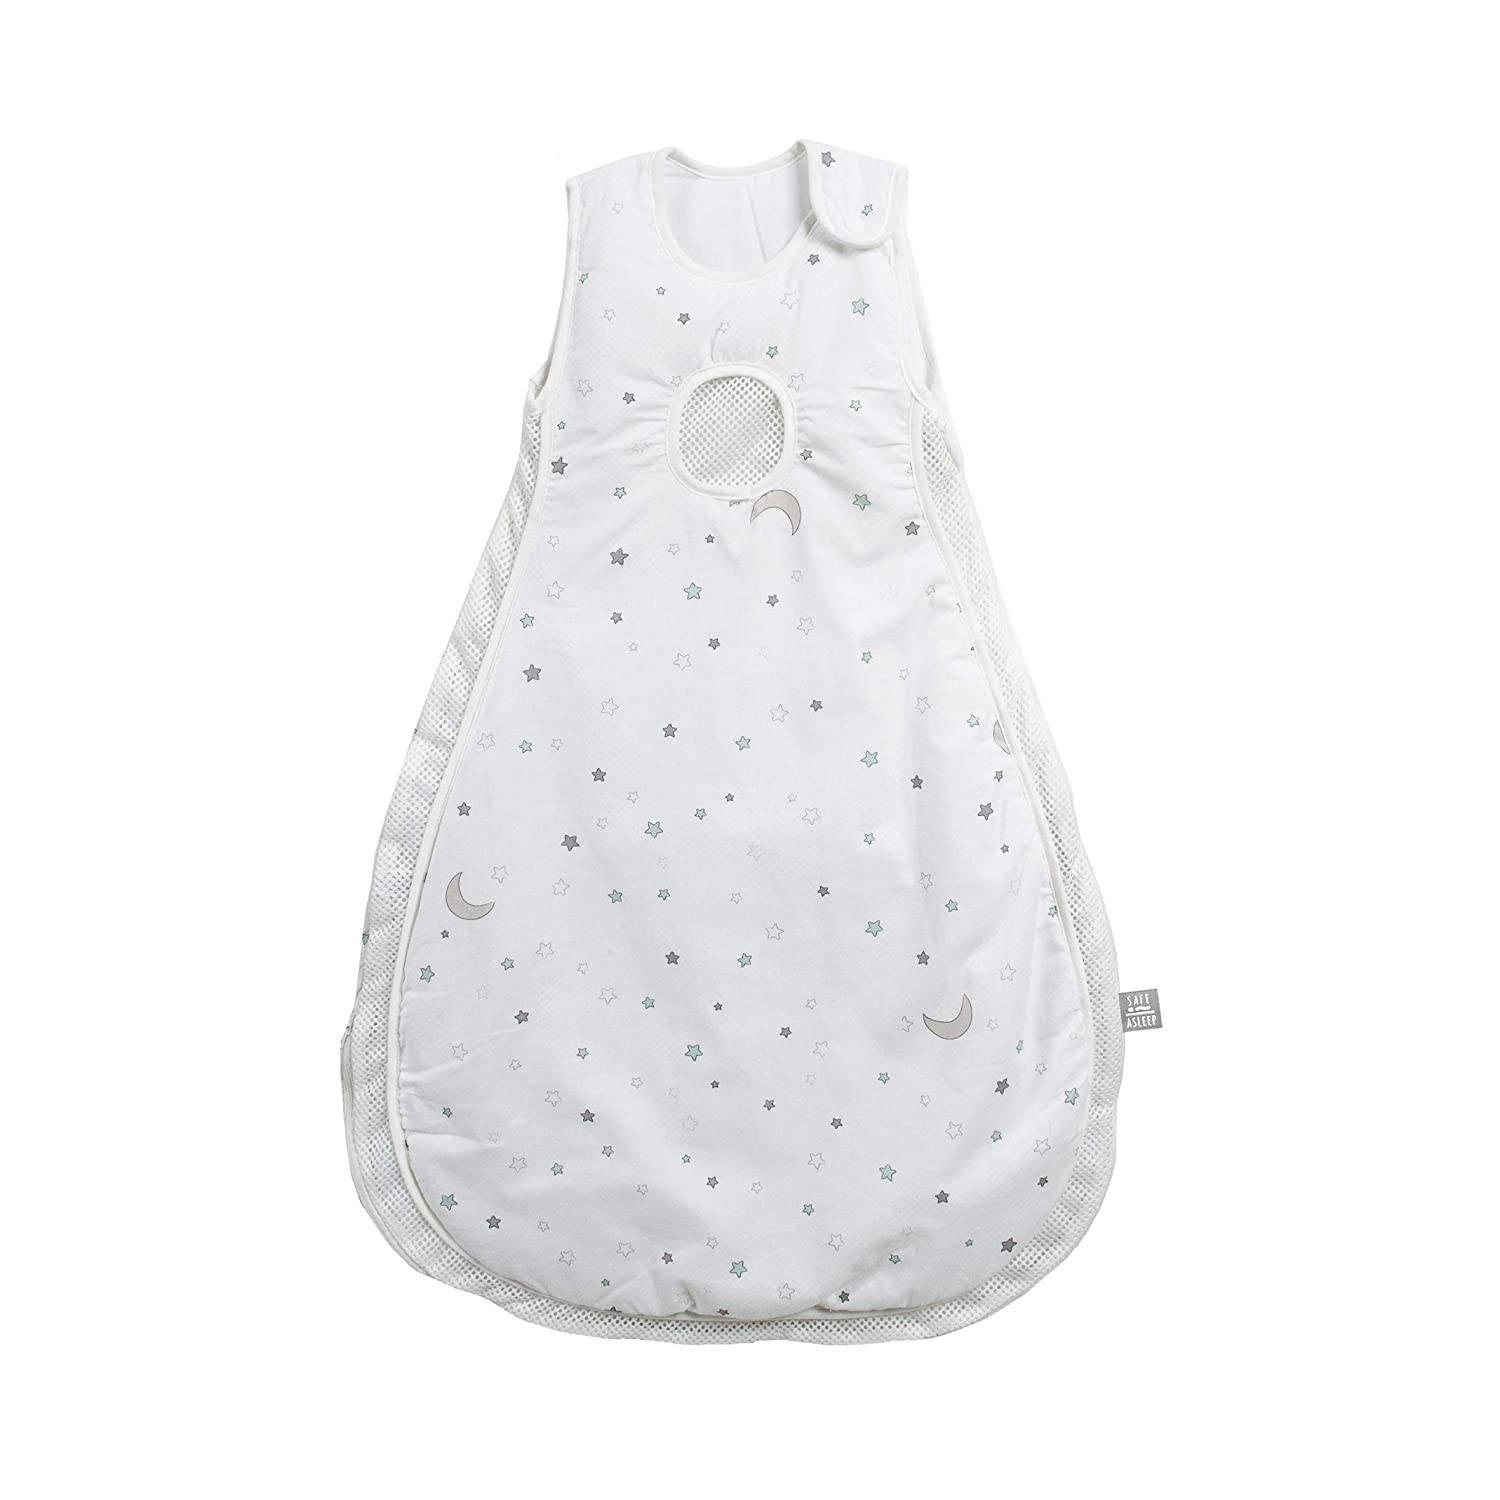 Roba safe asleep Easy Air Baby Sleeping Bag \"Star Magic\" Size 86/92 cm 100% Cotton Woven Printed Soft Filling 100% Polyester Mesh Inserts Air Balance System